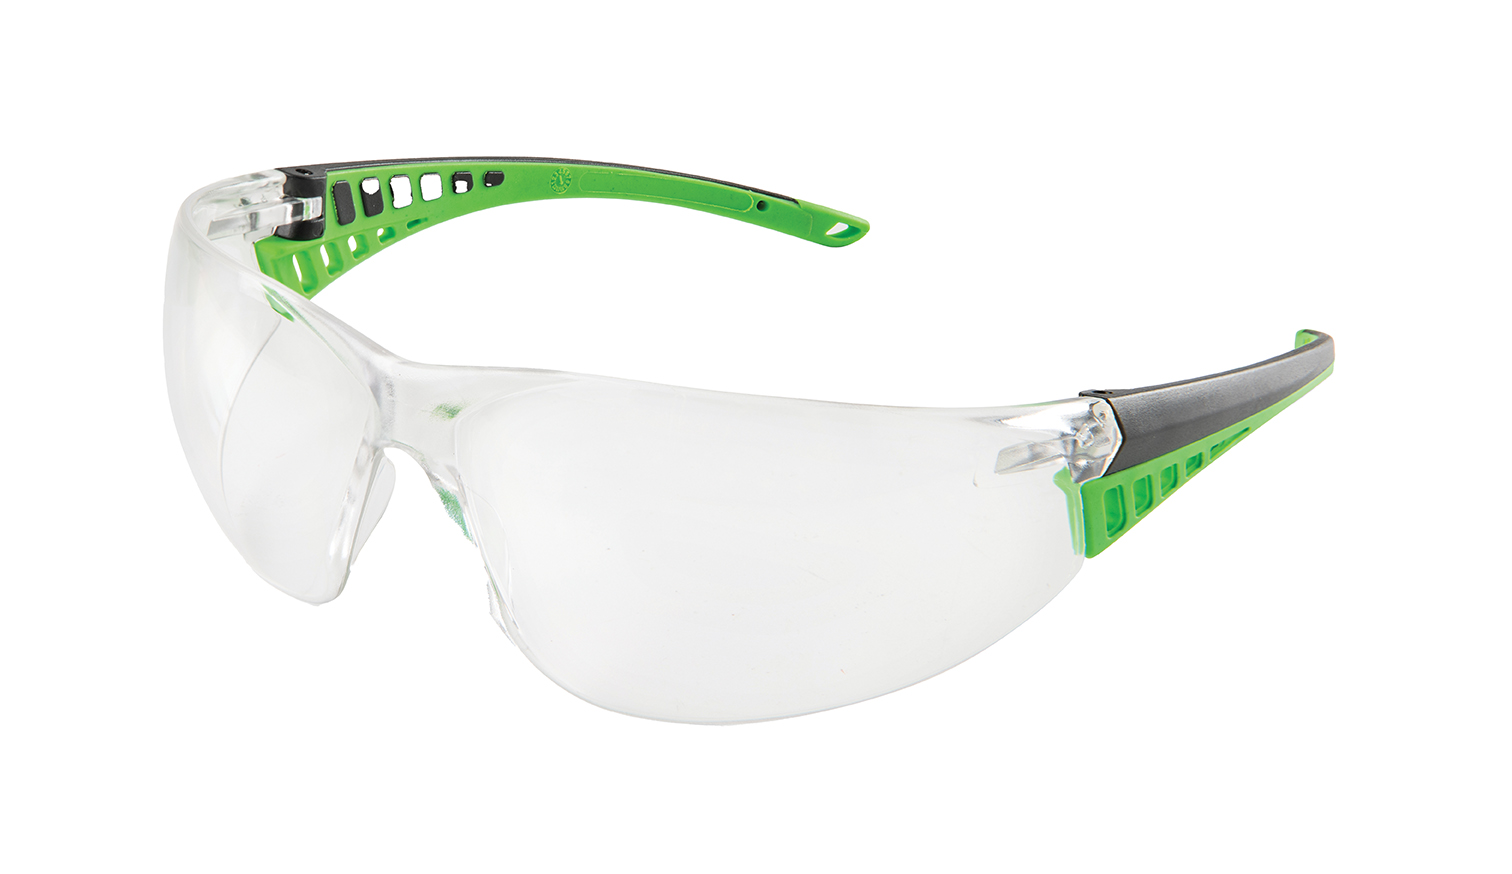 Clear safety glasses with green stems. Image by Brass Knuckle.